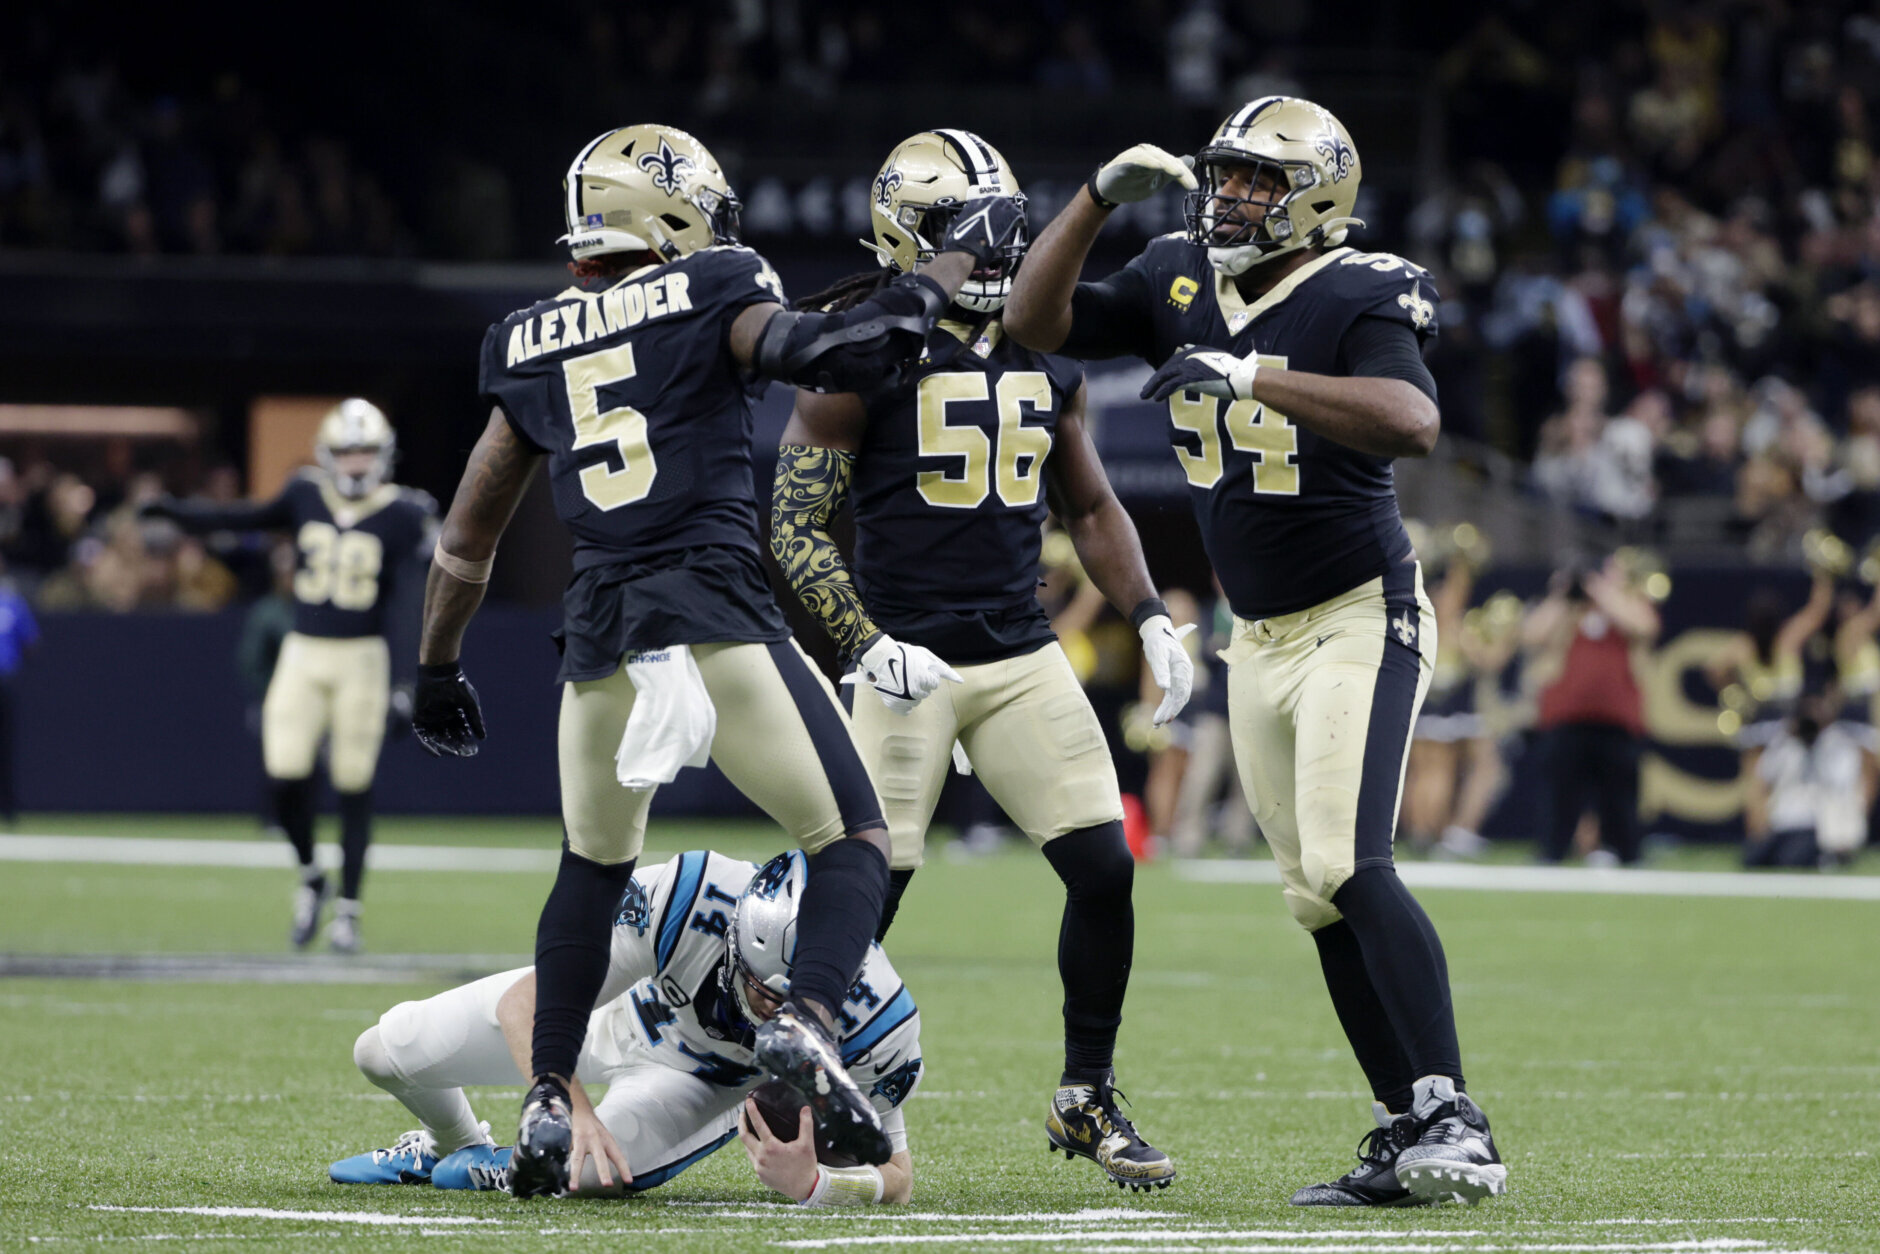 <p><em><strong>Panthers 10</strong></em><br />
<em><strong>Saints 18</strong></em></p>
<p>Look, I get that <a href="https://deadspin.com/the-end-is-here-for-cam-1848251451" target="_blank" rel="noopener">Cam wasn&#8217;t getting it done</a> but this continued bid to prop up Sam Darnold like he&#8217;s not damaged goods is pretty ridiculous. This ain&#8217;t it, Carolina — and neither is Matt Rhule making the decision.</p>
<p>You know what is it, though? This New Orleans defense. If I&#8217;m Russell Wilson, I&#8217;m doing whatever I have to do to get to the Crescent City in the offseason.</p>
